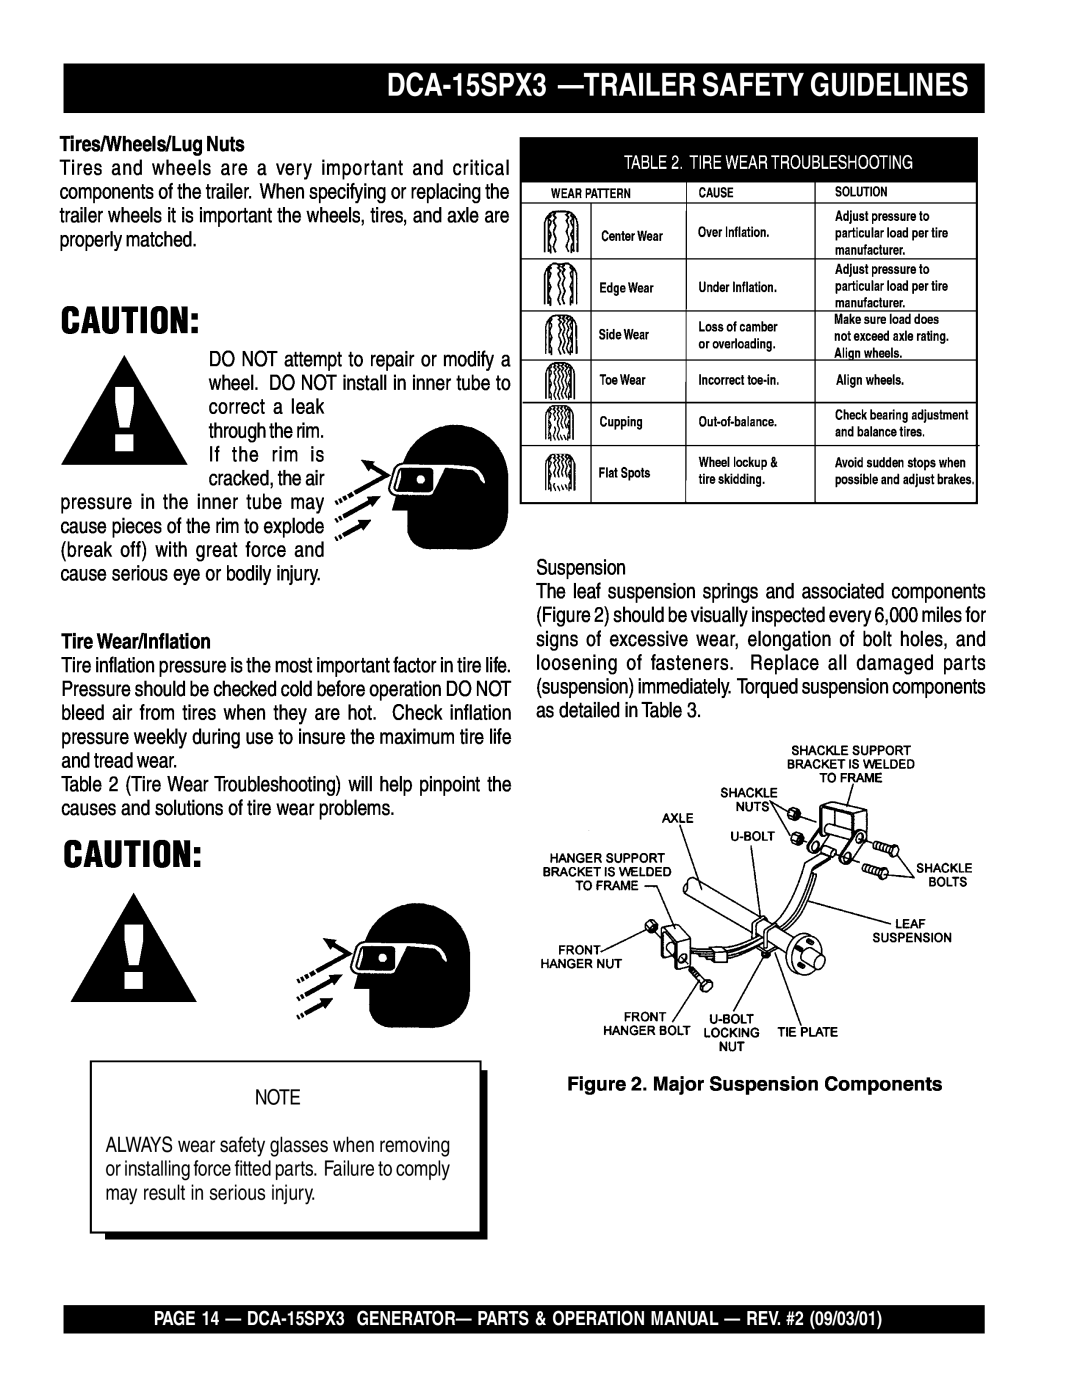 Multiquip operation manual DCA-15SPX3 —TRAILERSAFETY GUIDELINES, Tires/Wheels/Lug Nuts, Tire Wear/Inflation 